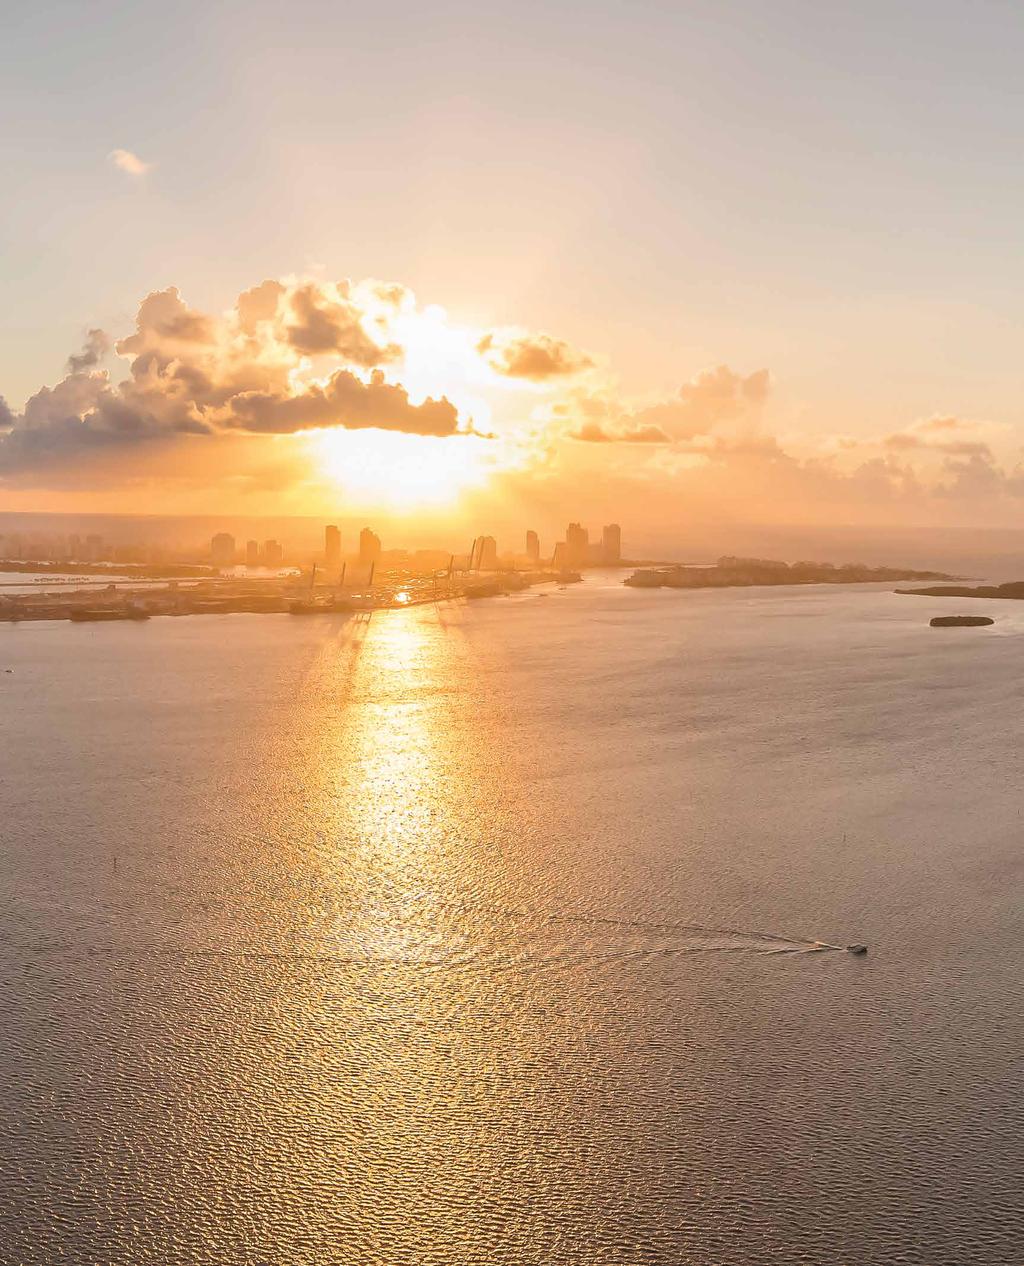 180 LUXURY RESIDENCES ECHO Brickell is an exclusive residential high-rise at the epicenter of Miami s fastest growing metropolitan neighborhood, located on the coveted east side of Brickell Avenue.